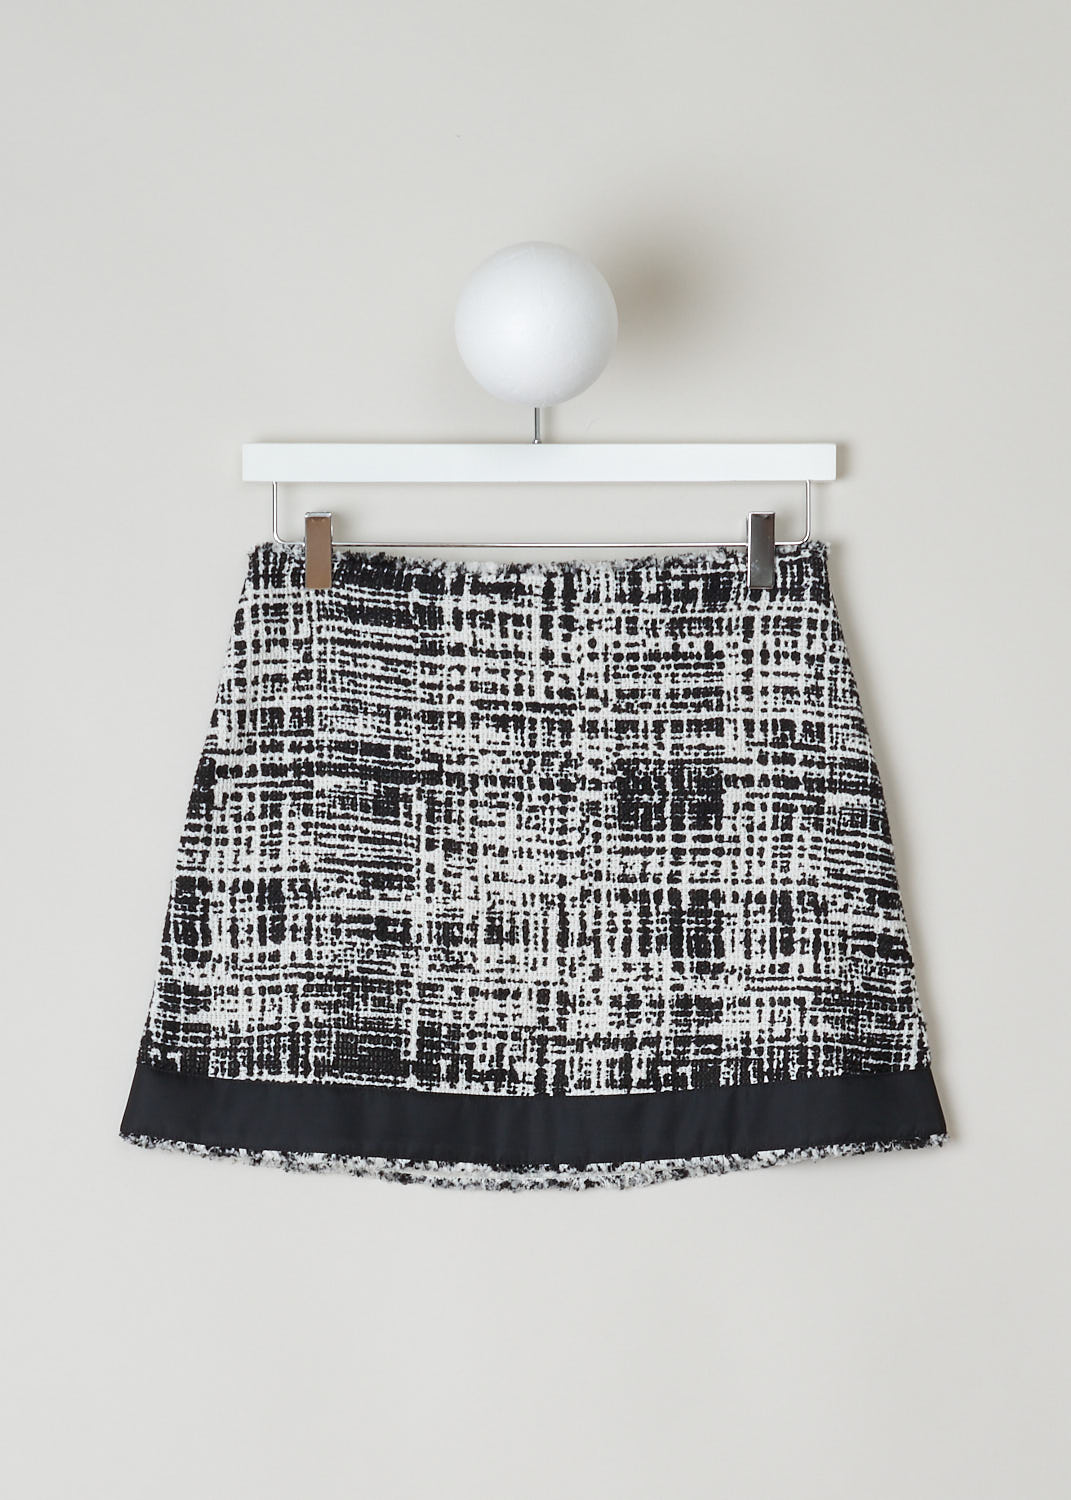 PRADA, BLACK AND WHITE TWEED MINI SKIRT, P164T_F0A72_03_TELONE_TWEED_RE_AVORIO_NERO, Black, White, Print, Front, This black and white tweed mini skirt has a concealed zip closure in the side seam. The skirt has a broad black trim along the hemline. In the back, the skirt has a single welt pocket with a black trim with underneath a black and silver logo plaque. The skirt is fully lined. 
